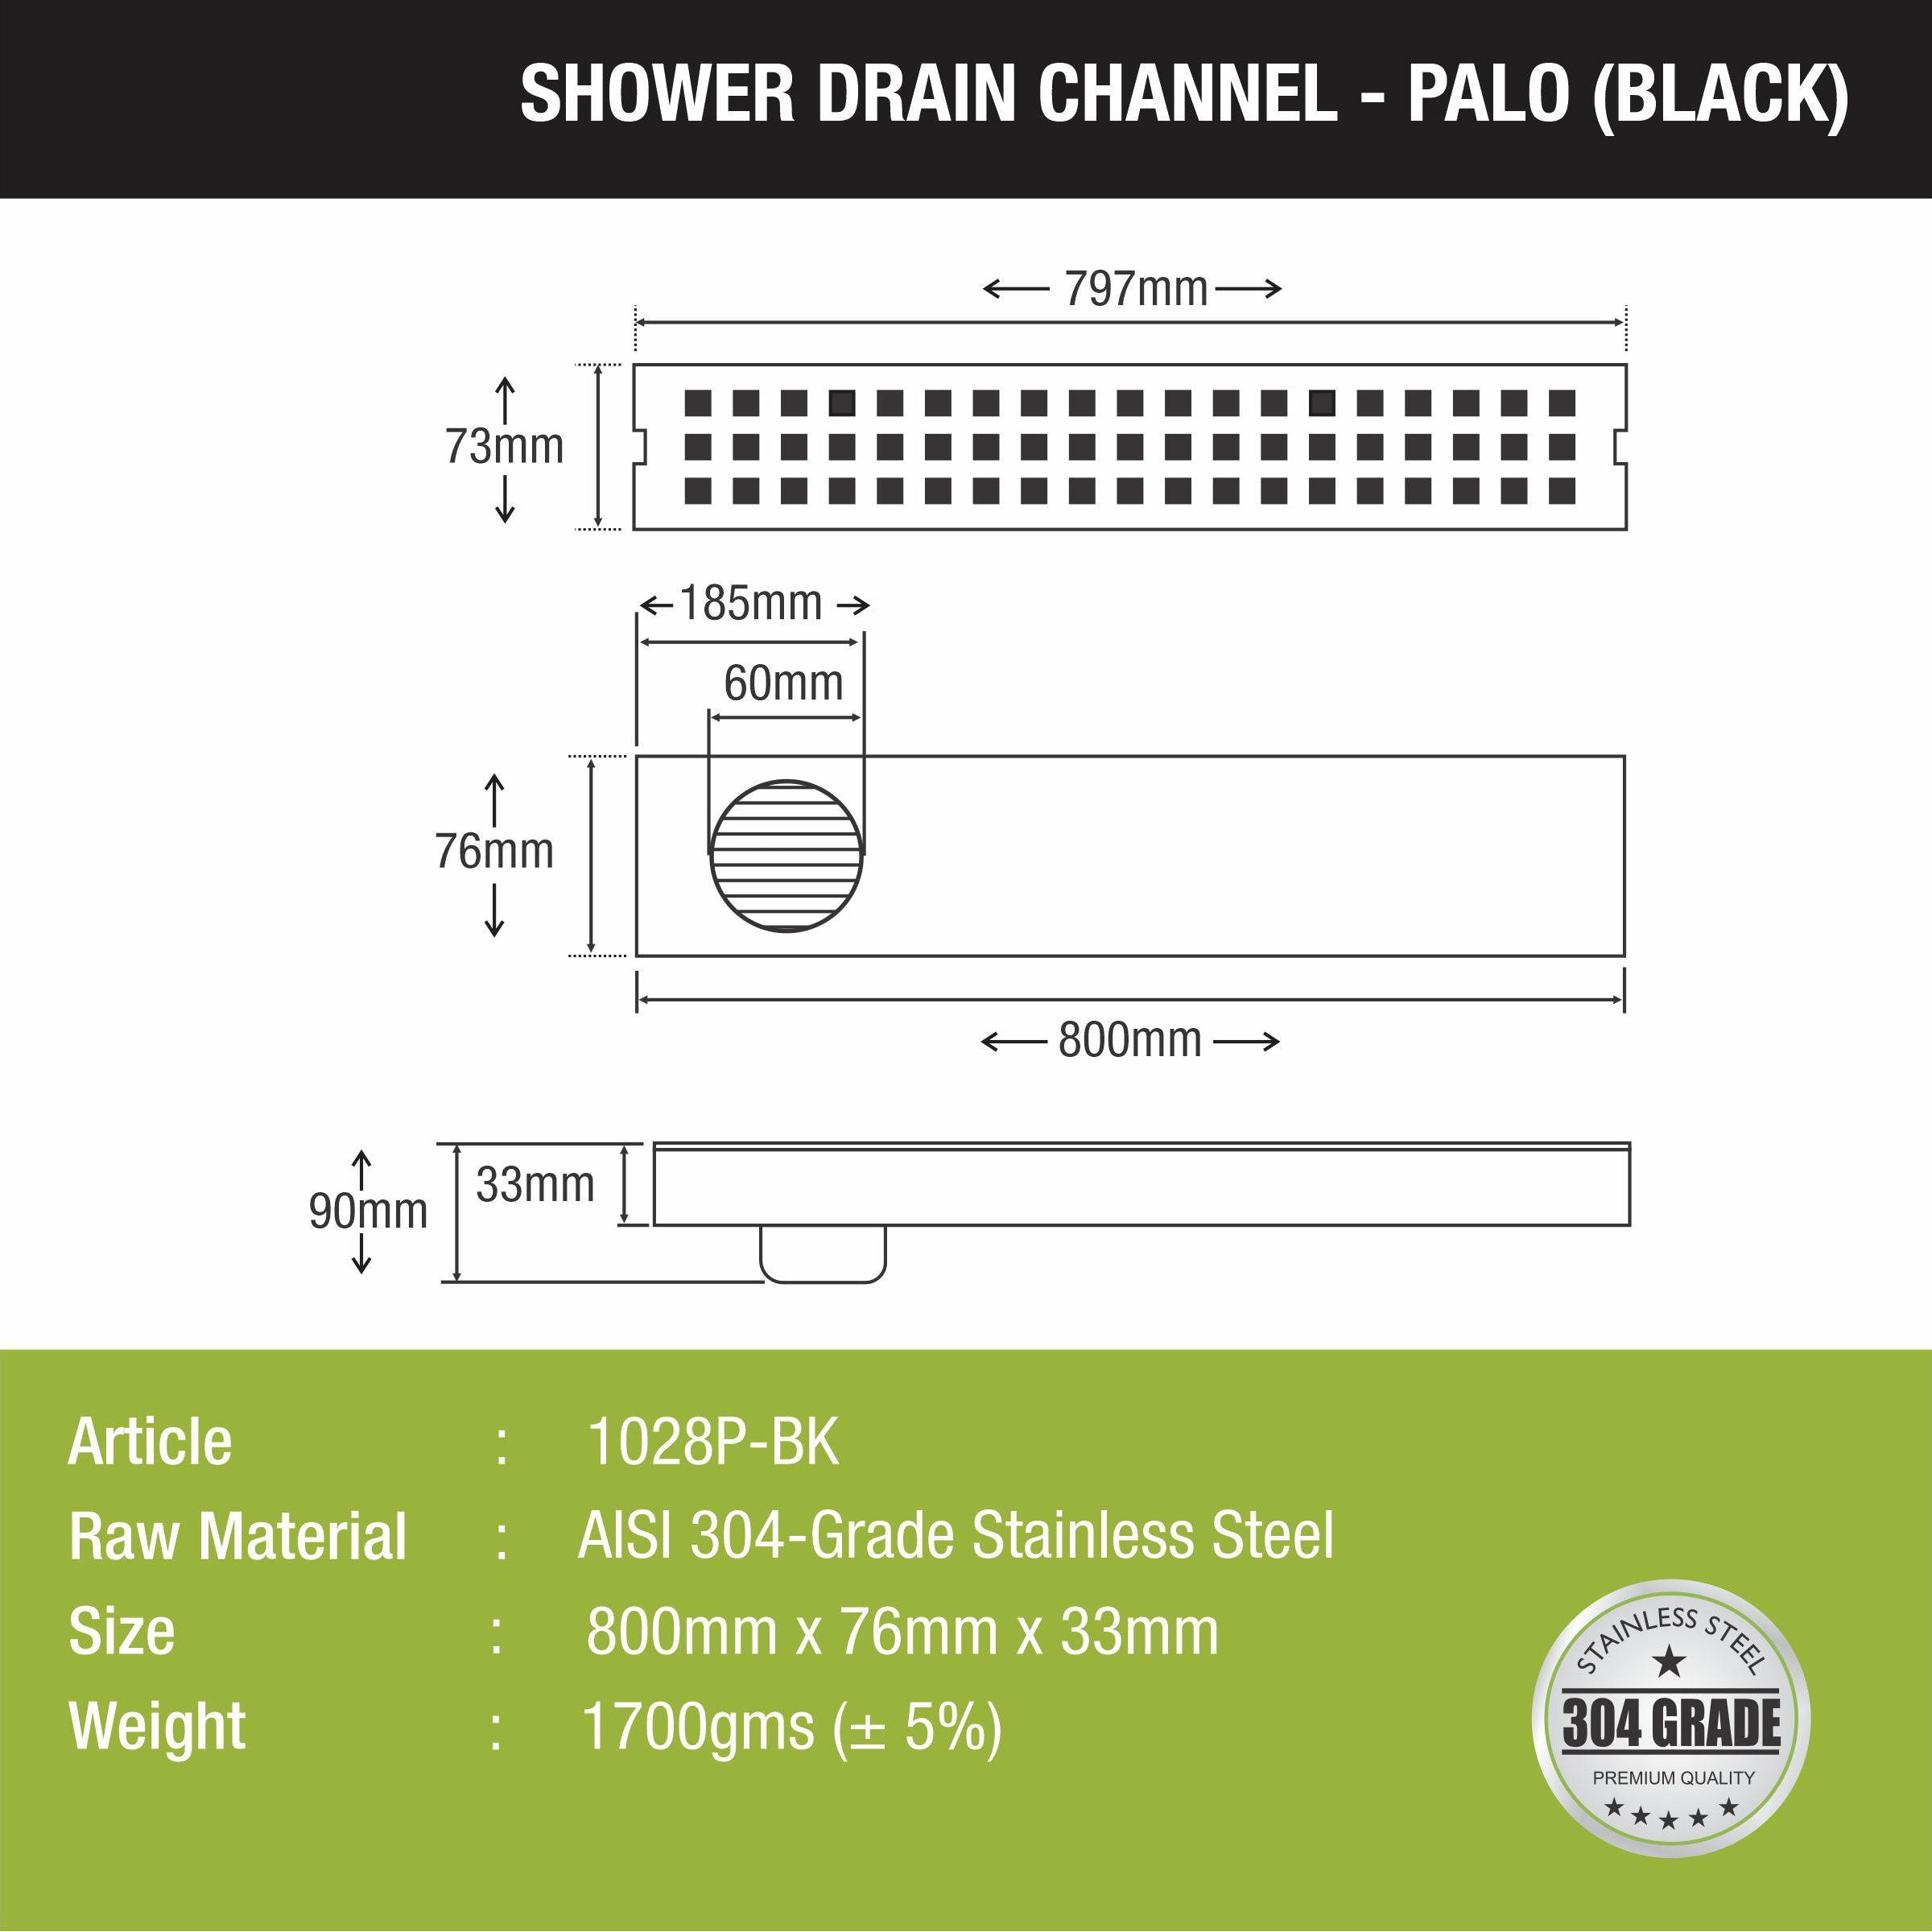 Palo Shower Drain Channel - Black (32 x 3 Inches) size and measurement